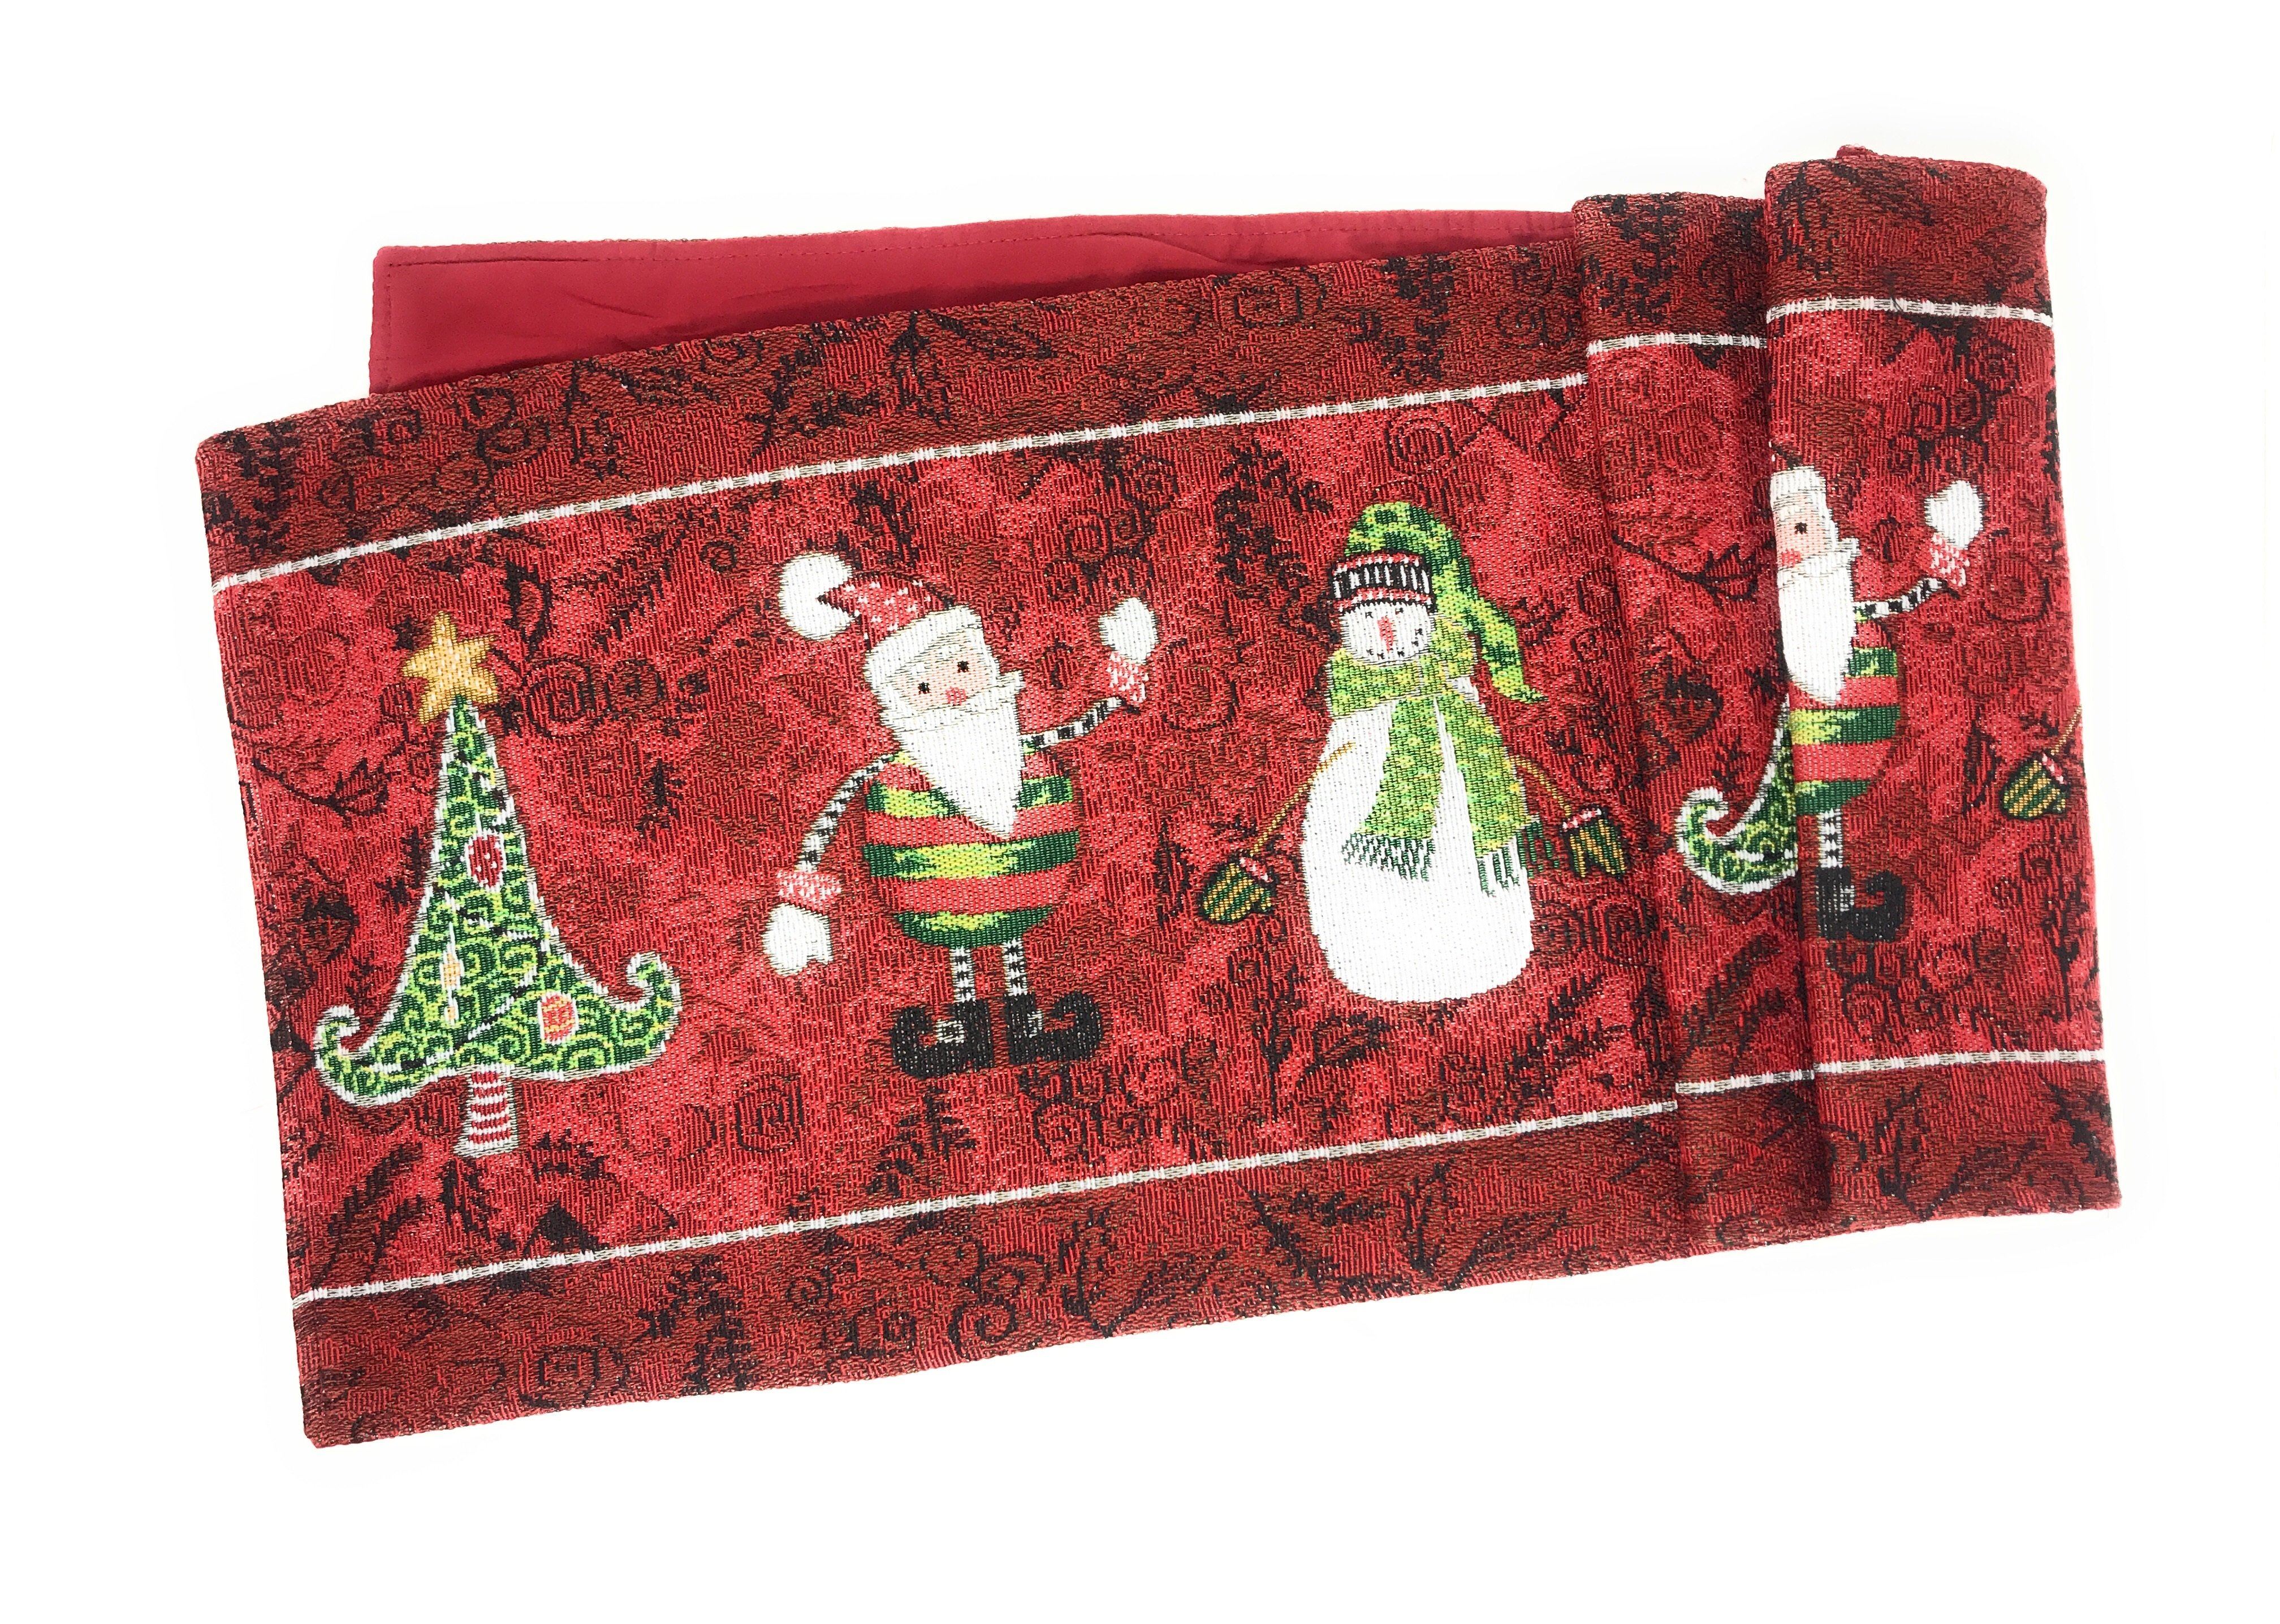 Tache Here Comes Santa Claus Vintage Holiday Woven Tapestry Table Runners (8577TR) - Tache Home Fashion